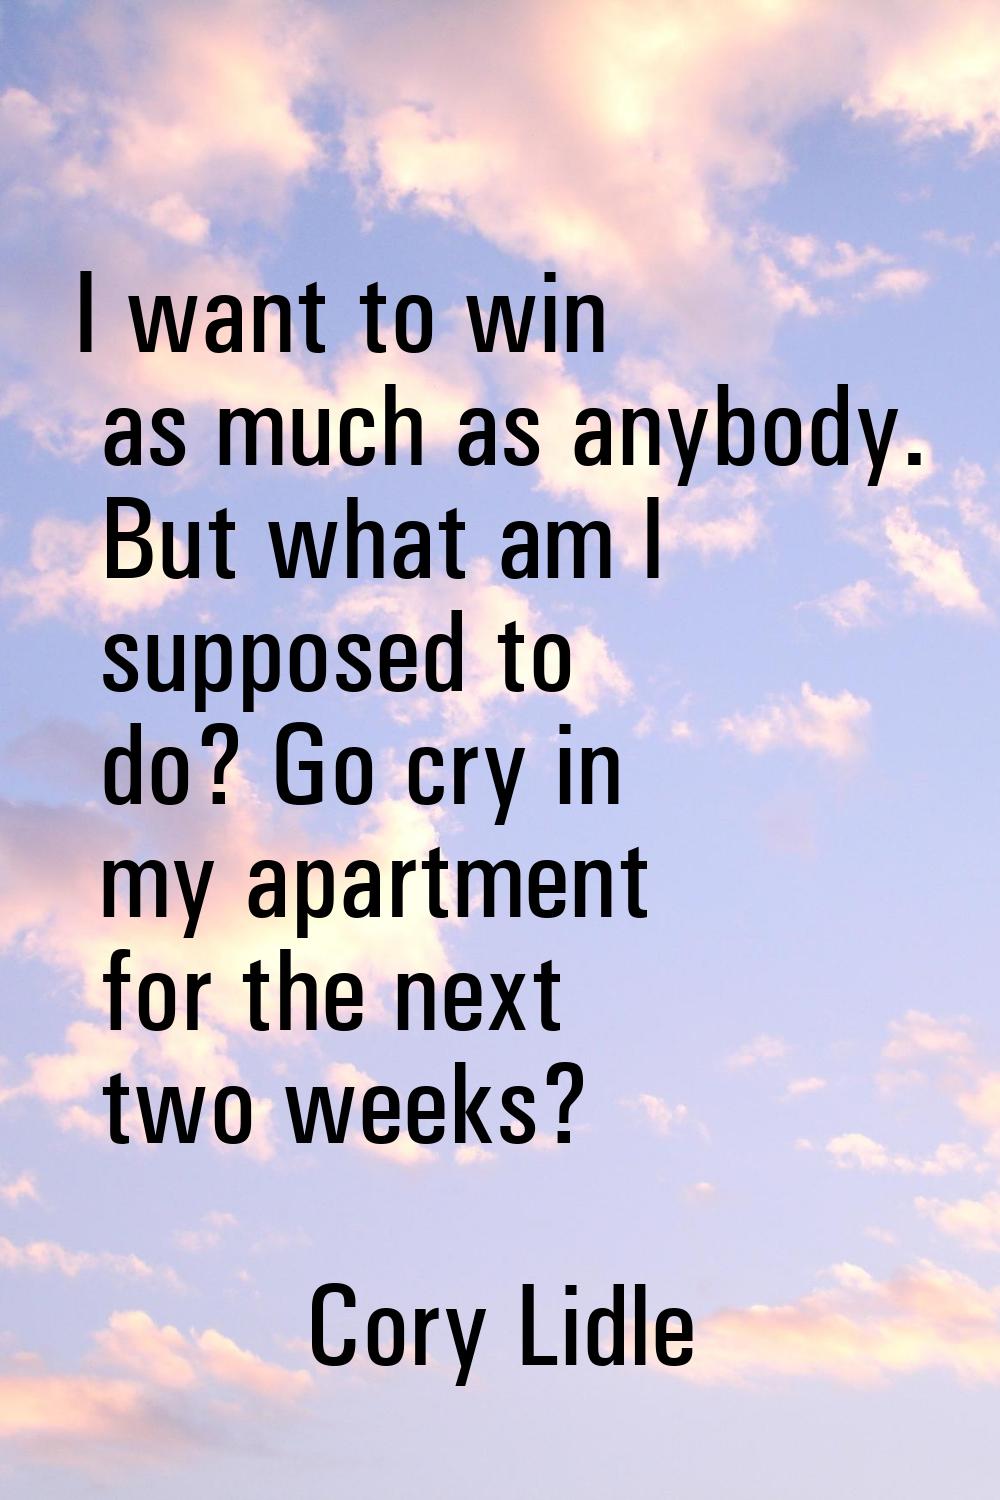 I want to win as much as anybody. But what am I supposed to do? Go cry in my apartment for the next